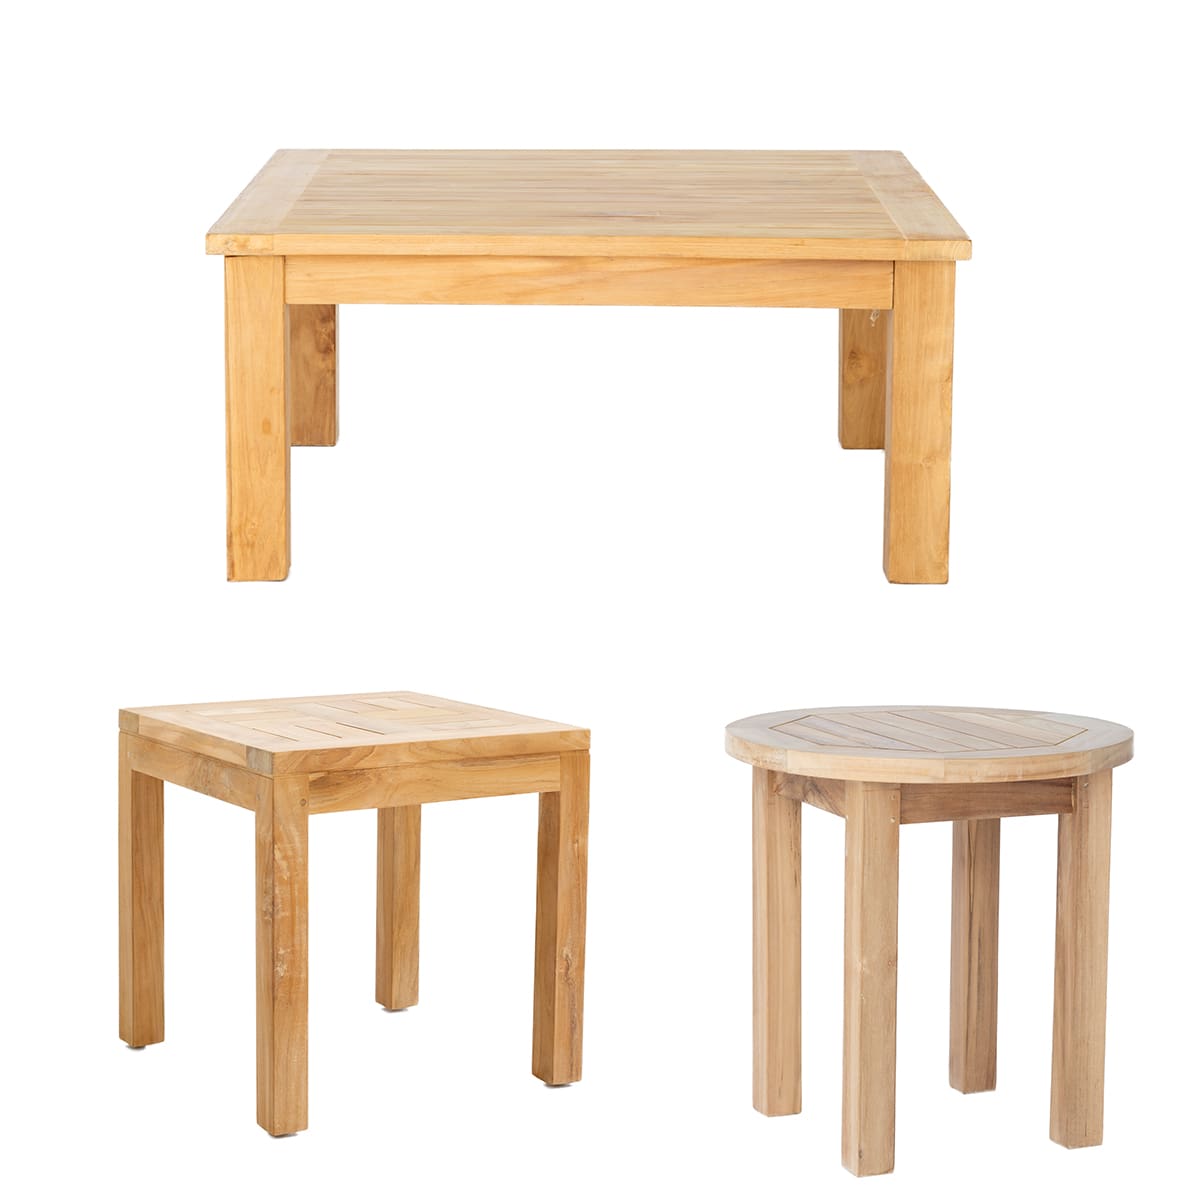 Three teak accent tables: one square, one rectangular, and one round. All are in a light teak wood with four sturdy legs. Shop the collection at West Ashley furniture stores